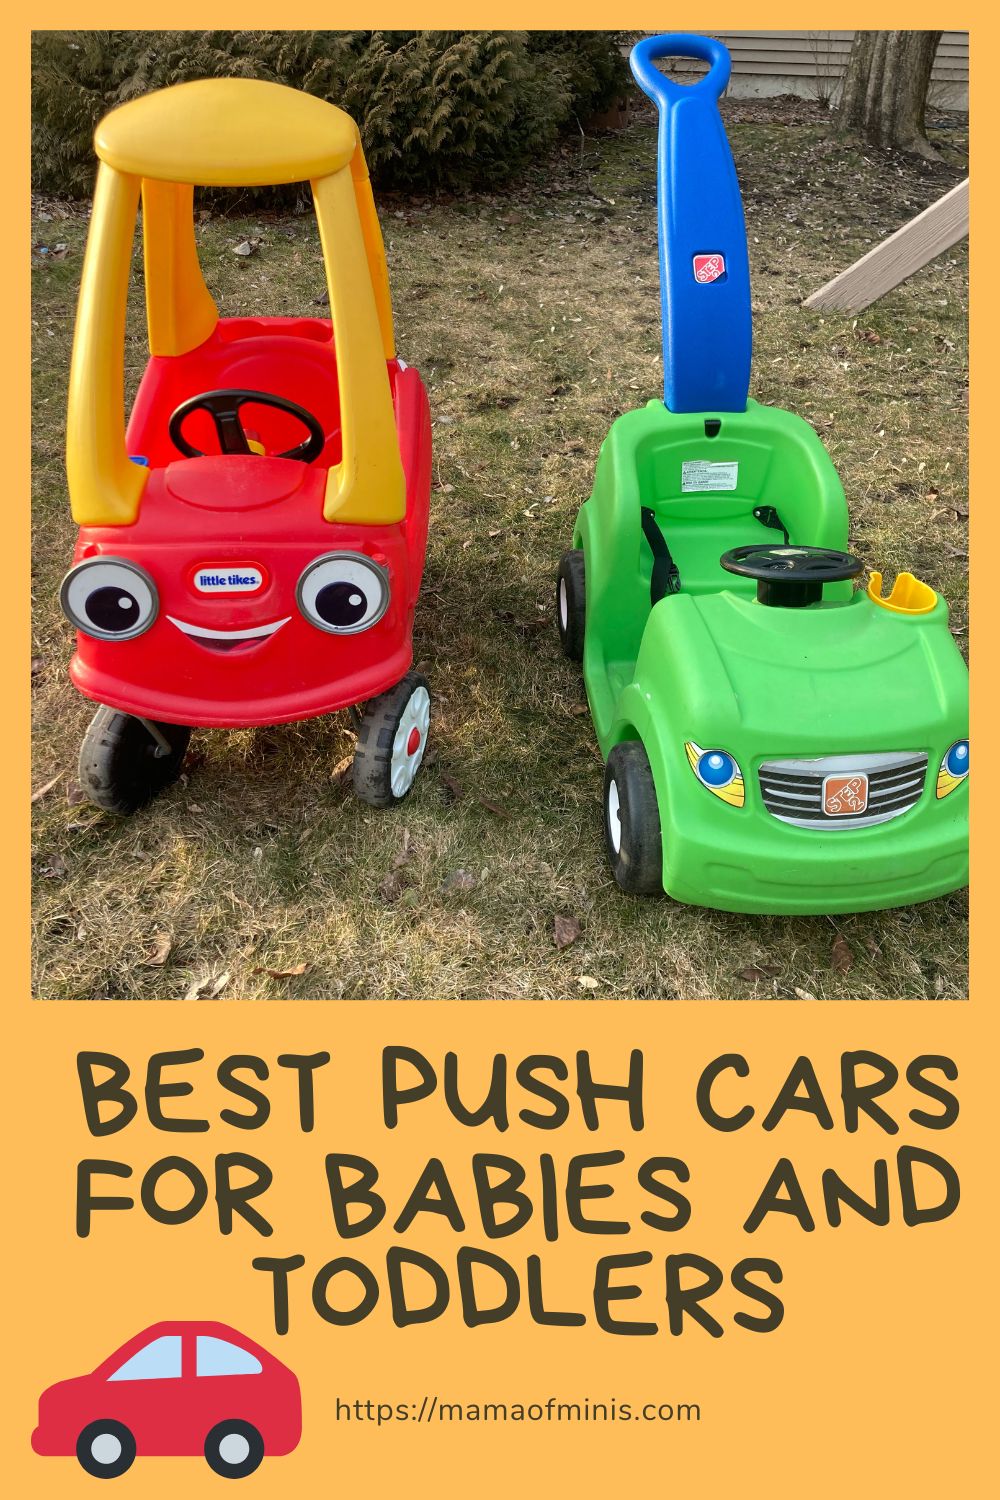 Best Push Cars for Babies and Toddlers